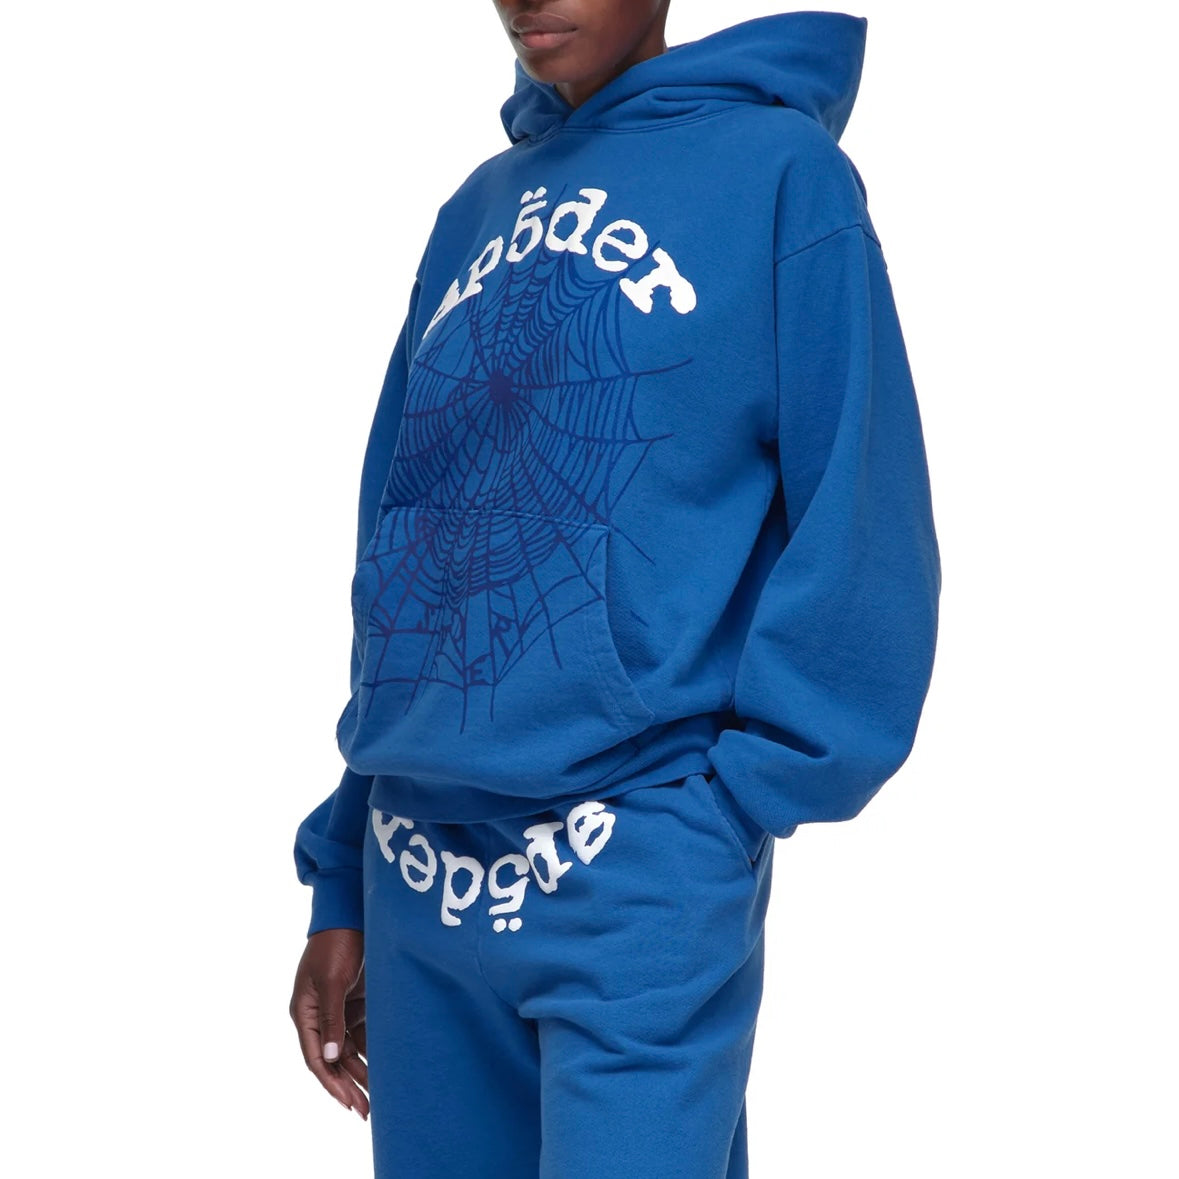 Sp5der Blue White Legacy Hoodie On Body Front Left Female